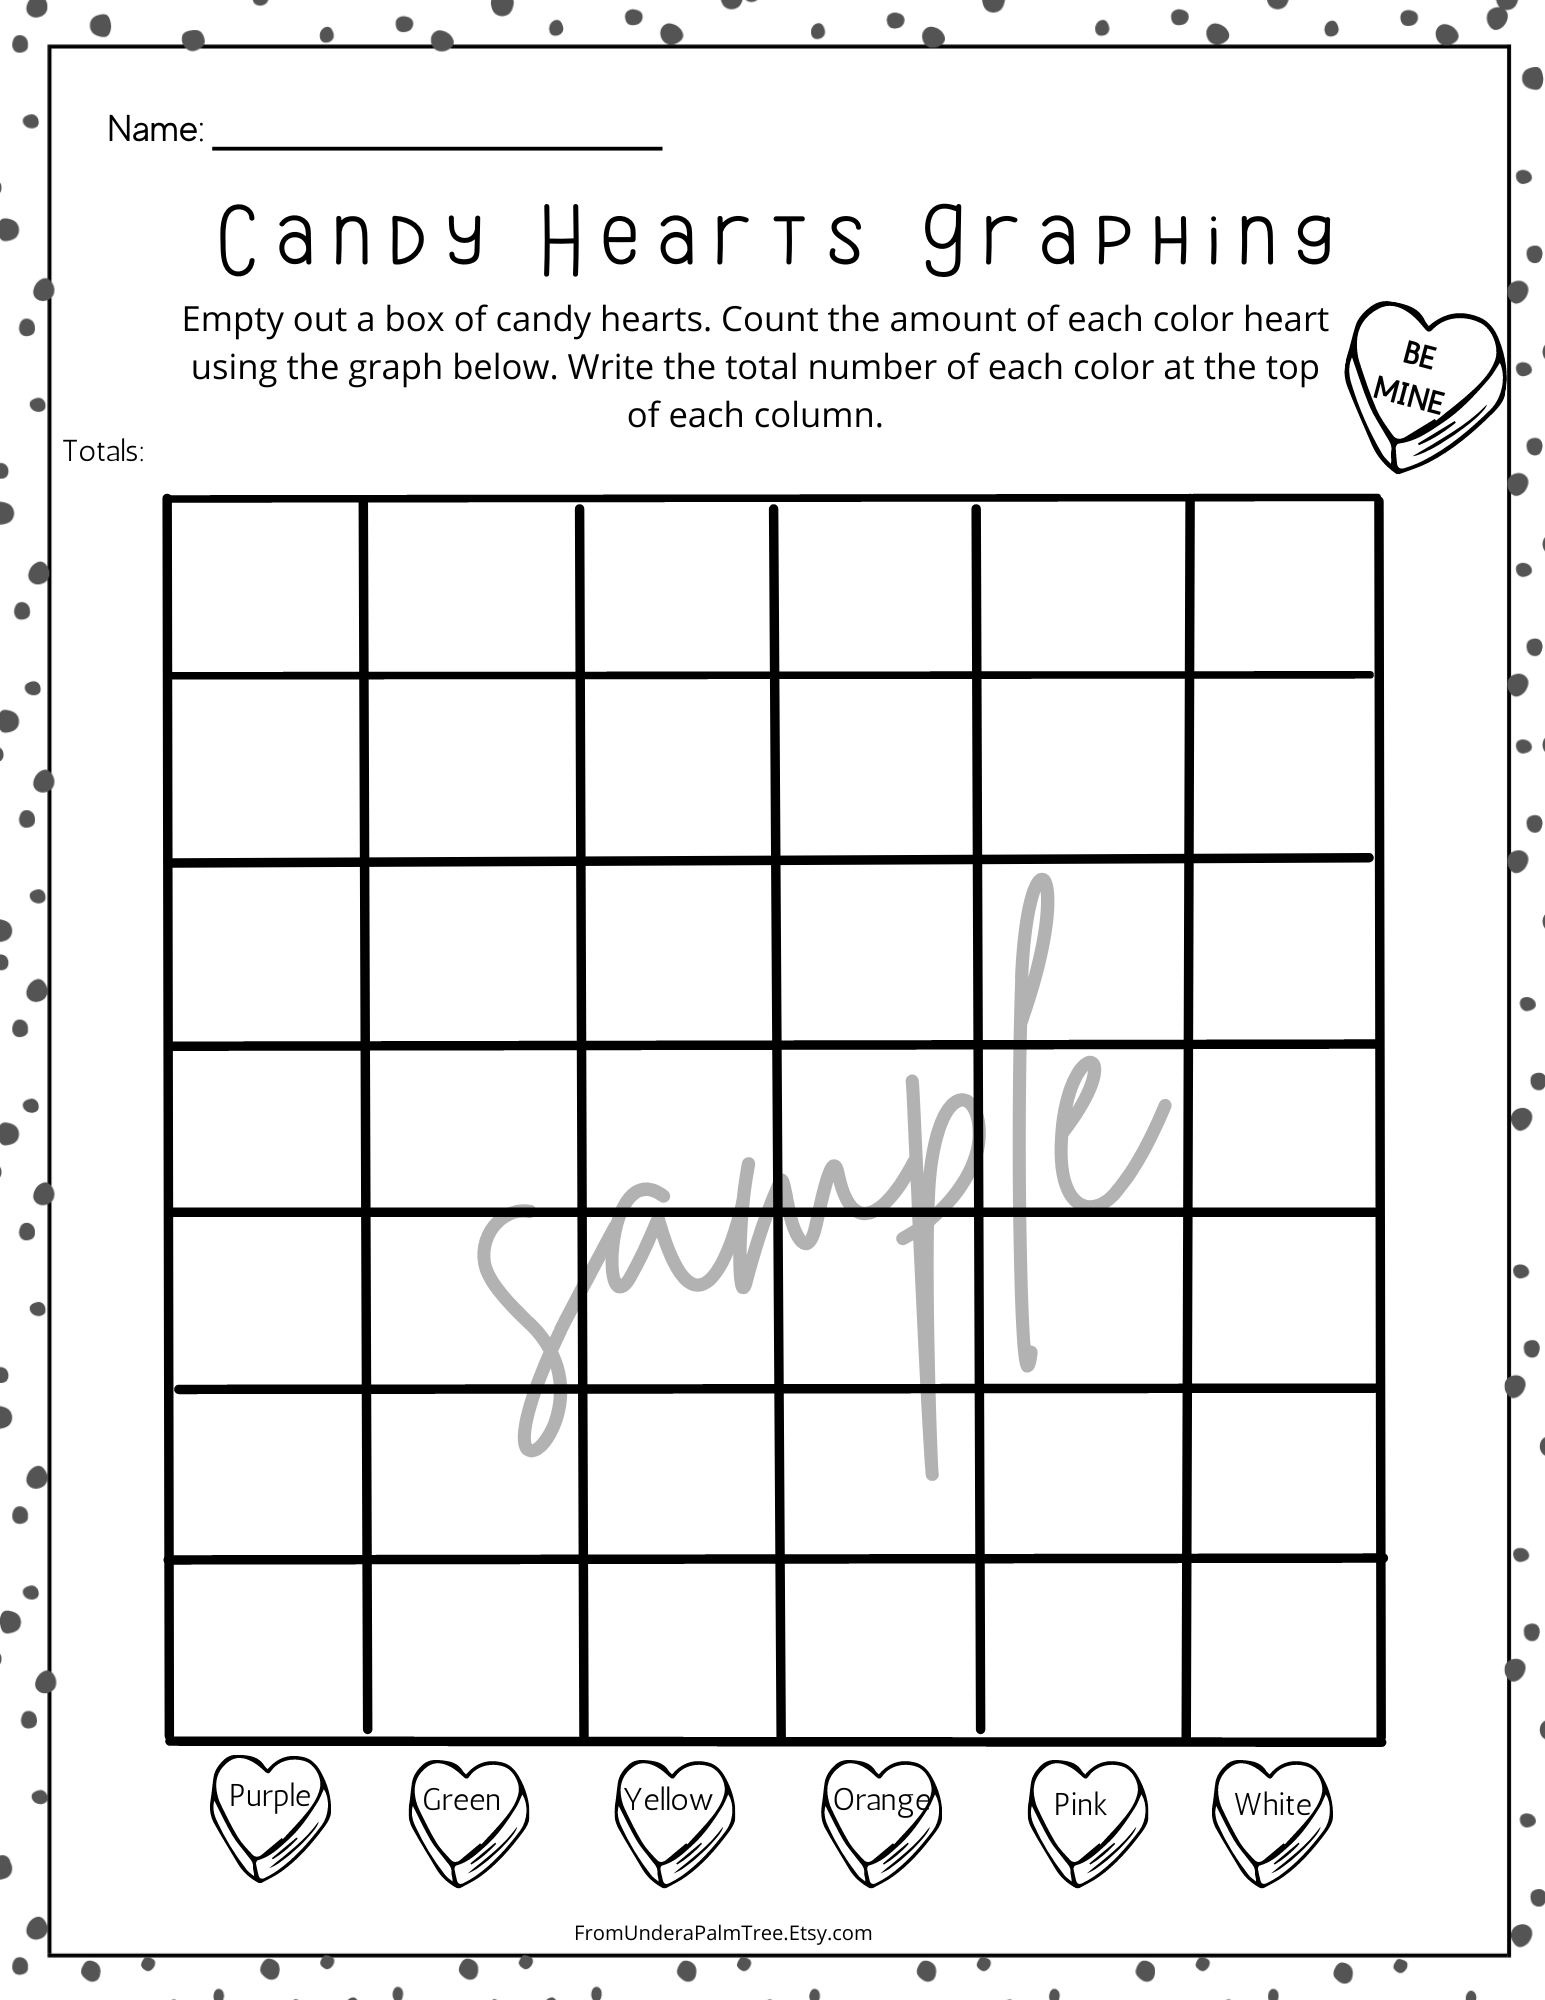 valentines day | valentines day worksheets | valentines day activity | valentines day printables | valentines day worksheet | valentines day scavenger hunt | valentines day math worksheets | valentines day kindergarten worksheets | valentines day first grade worksheets | valentines day worksheet | valentines day word search | valentines day graphing | valentines day mazes | valentines day coloring sheets | valentines day color by numbers | candy hearts activity | candy hearts math | candy hearts worksheet | printables for kids | homeschool lesson plan | homeschooling | teacher resources | first grade printables | kindergarten printables |